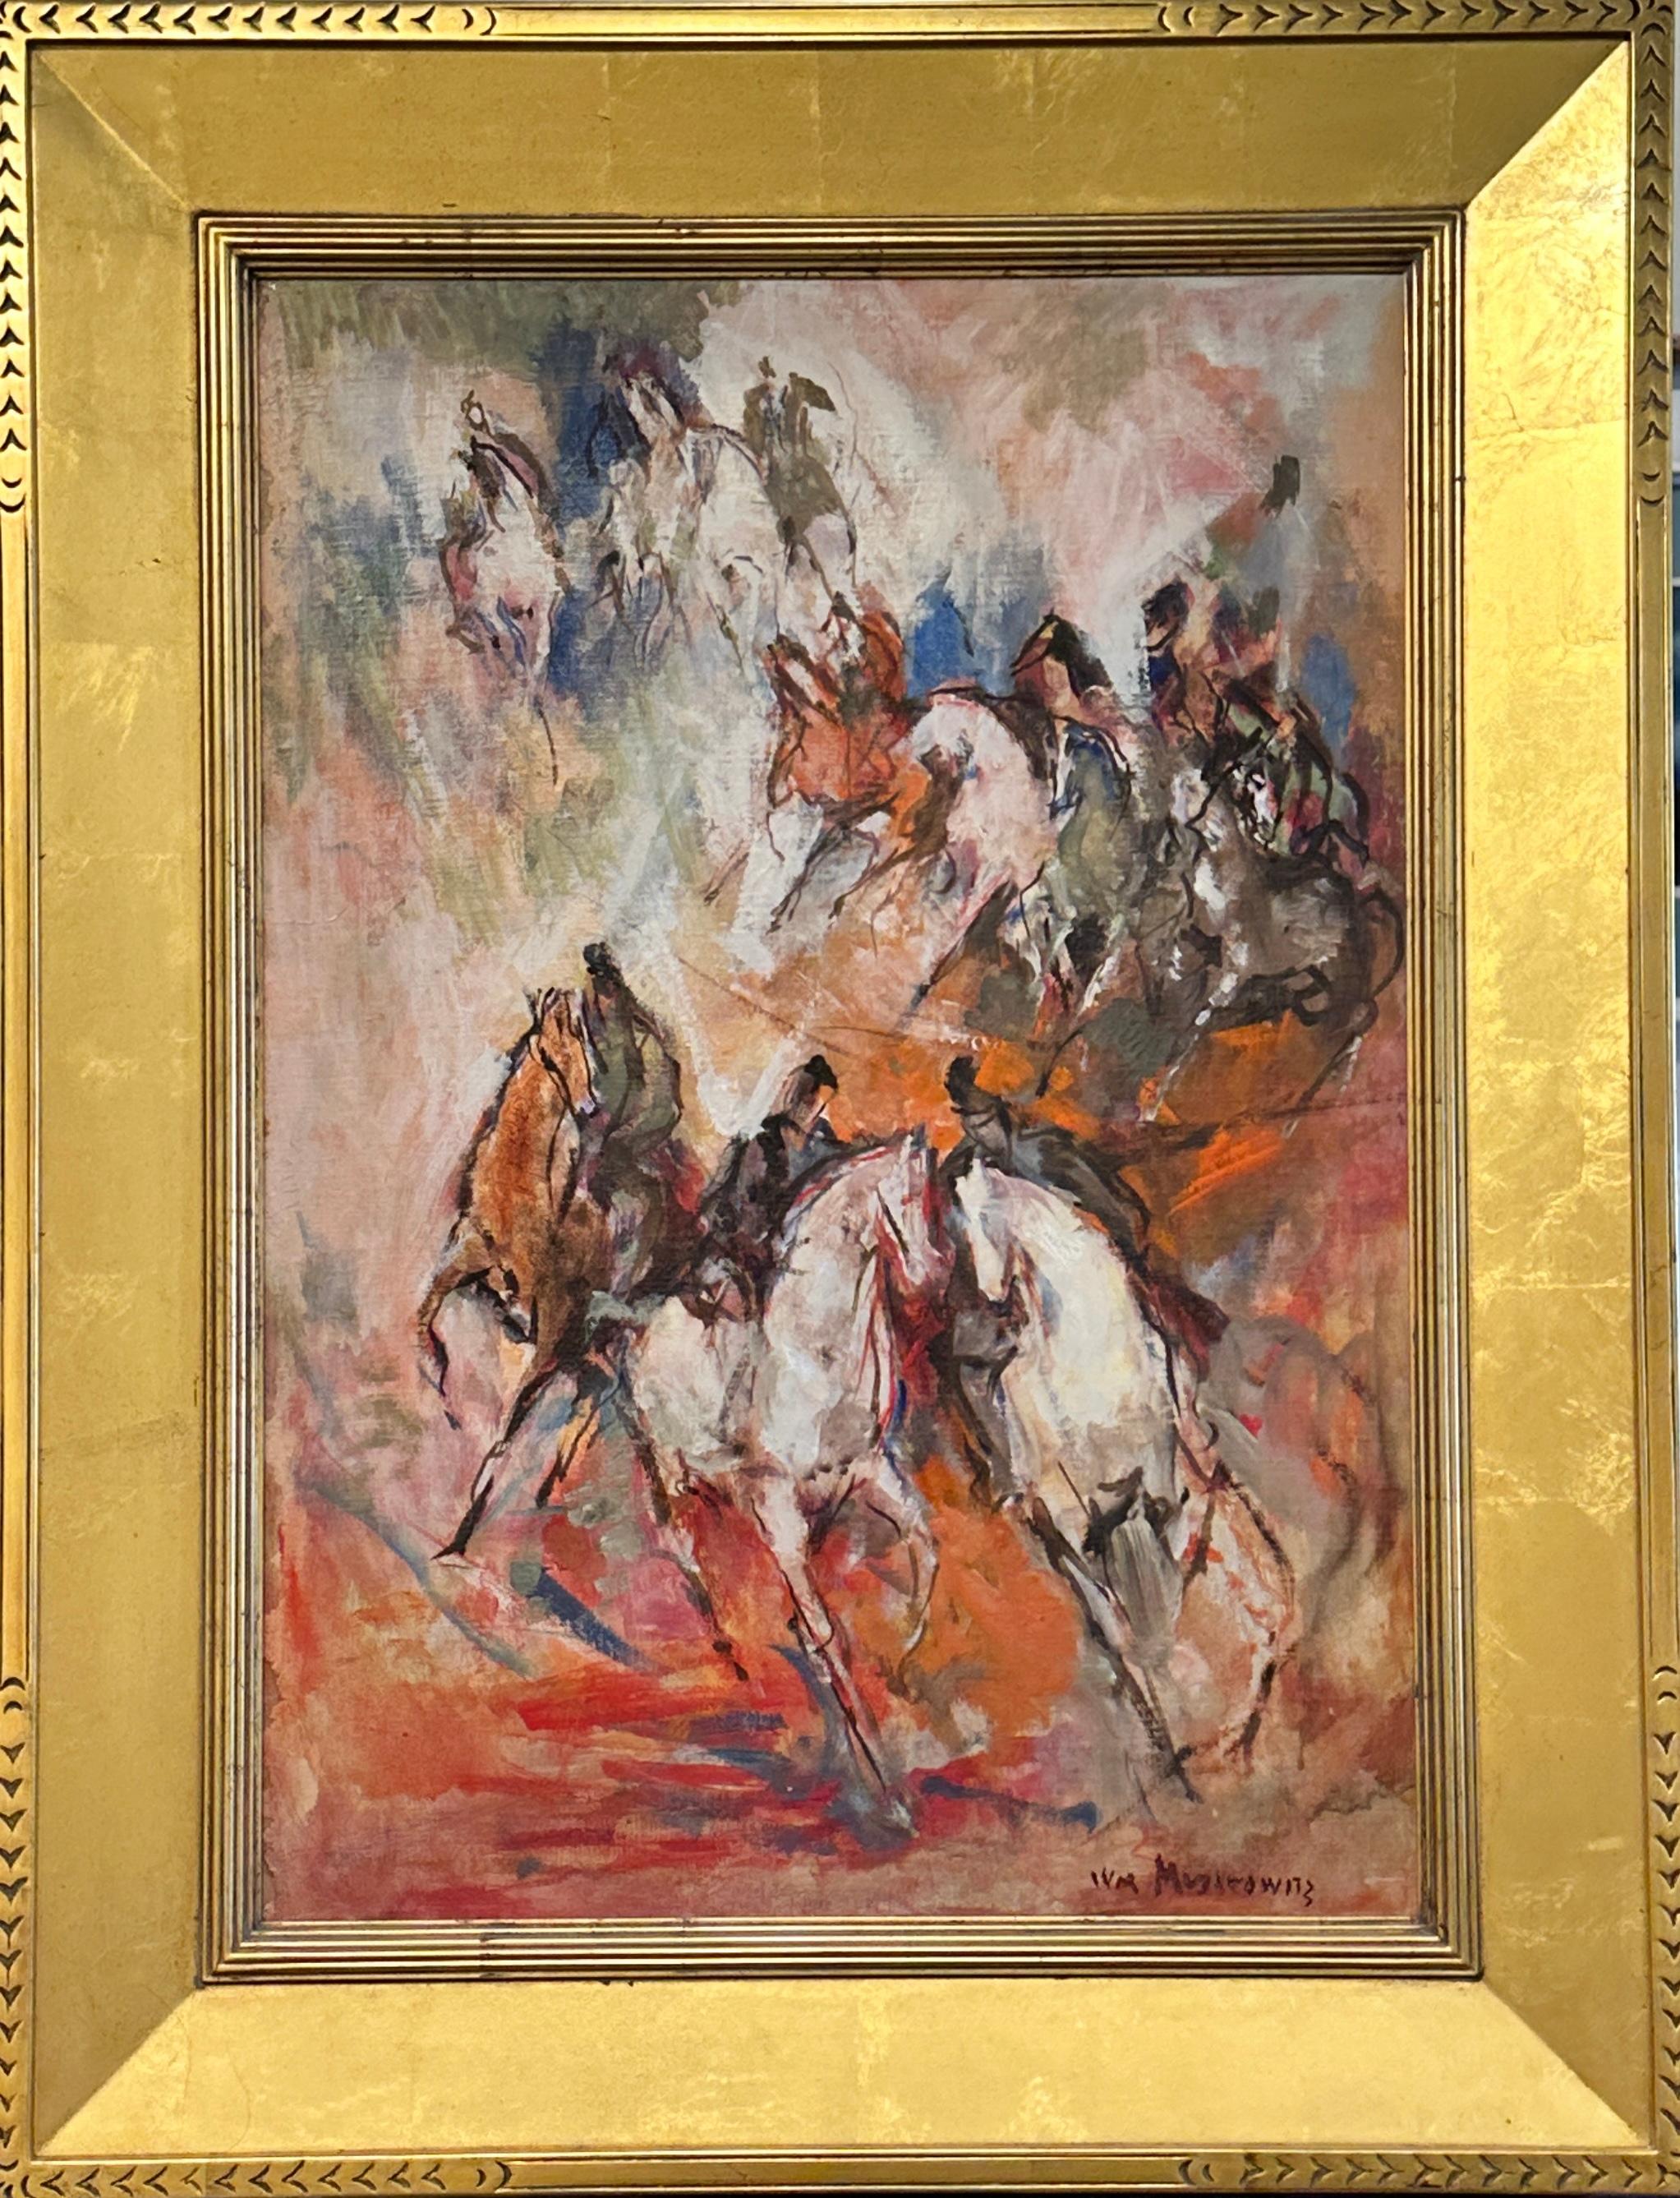 Horses, Colorful Horses, expressionistic, post-impressionistic  - Painting by William Meyerowitz